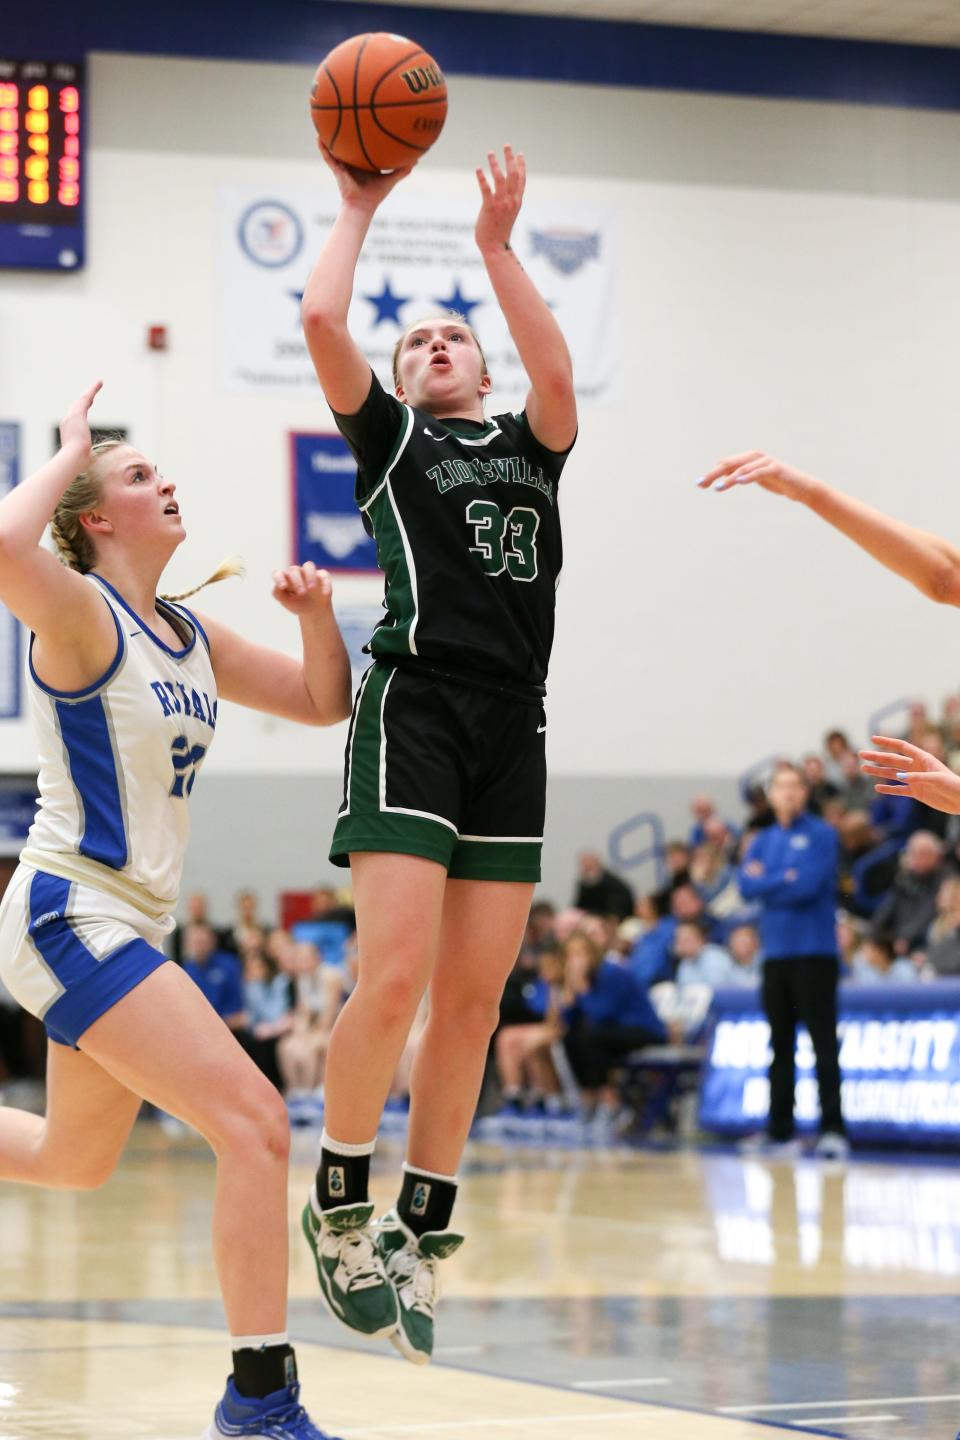 Zionsville Mckenzie Chapman (33) with the short jump shot as Zionsville takes on Hamilton Southeastern High School in the S8 IHSAA Class 4A Girls Basketball State Semi-finals; Feb 2, 2024; Fishers, IN, USA; at Hamilton Southeastern High School.